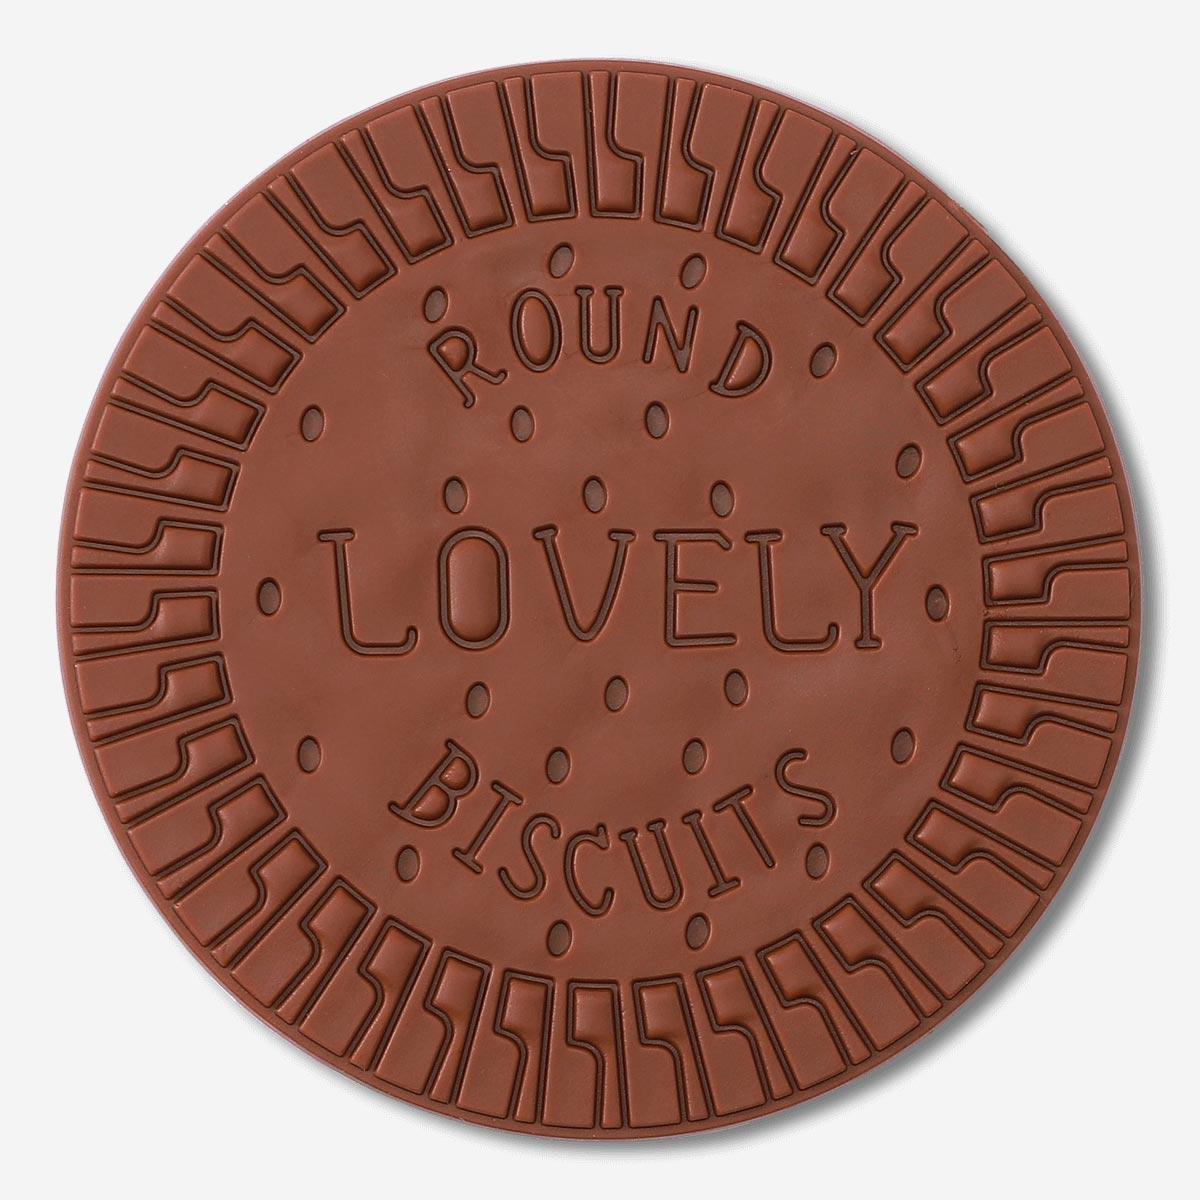 Brown chocolate biscuits notepad